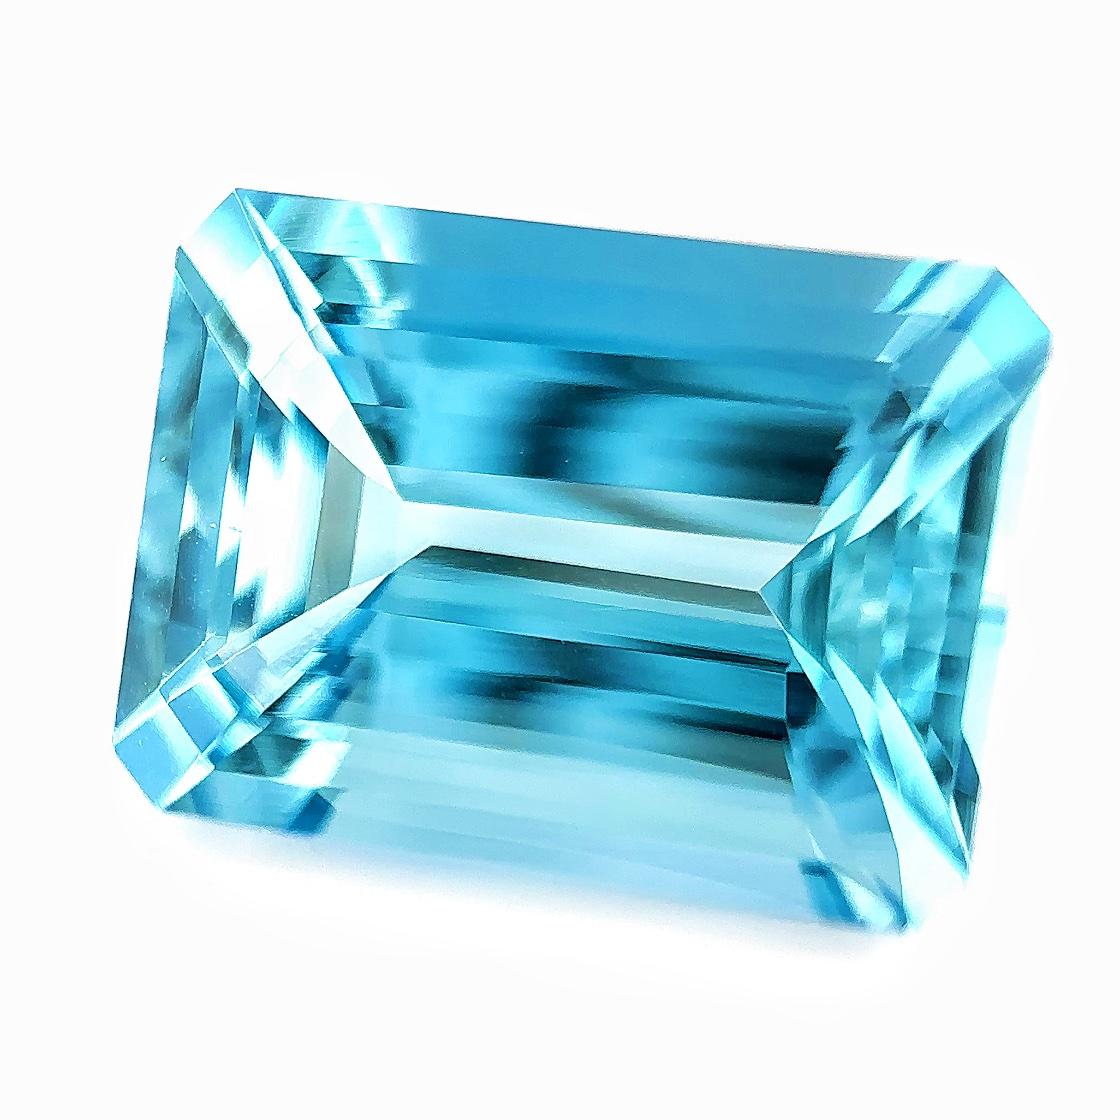 6.63 Carat Natural Santa Maria Color Aquamarine Loose Stone

Appointed lab certificate can be arranged upon request

This Item is ideal for your design as an engagement ring, cocktail ring, necklace, bracelet, etc.


ABOUT US

Xuelai Jewellery